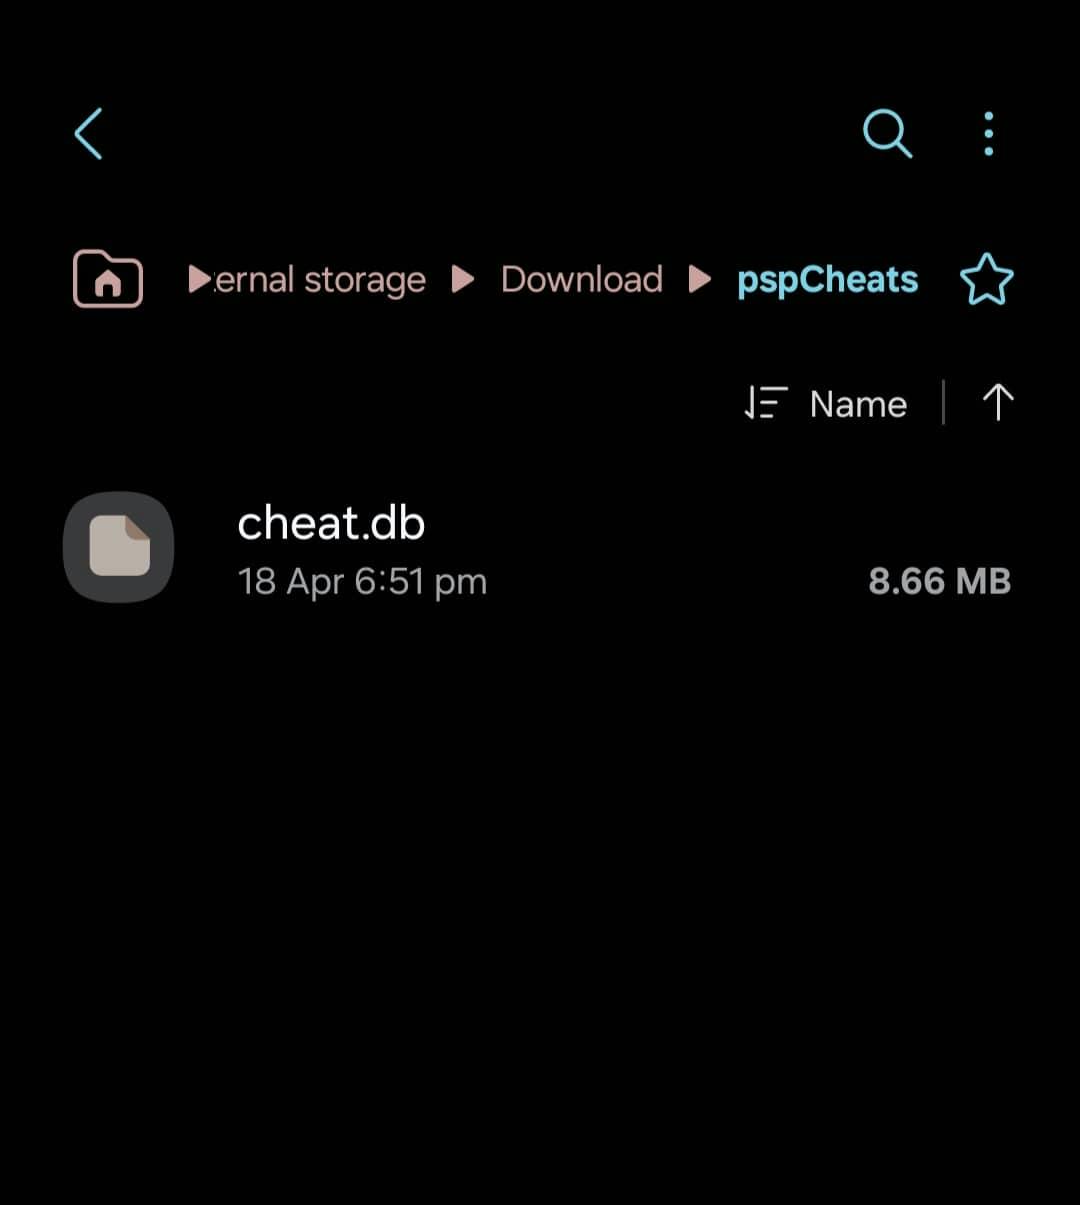 Download the Cheat File